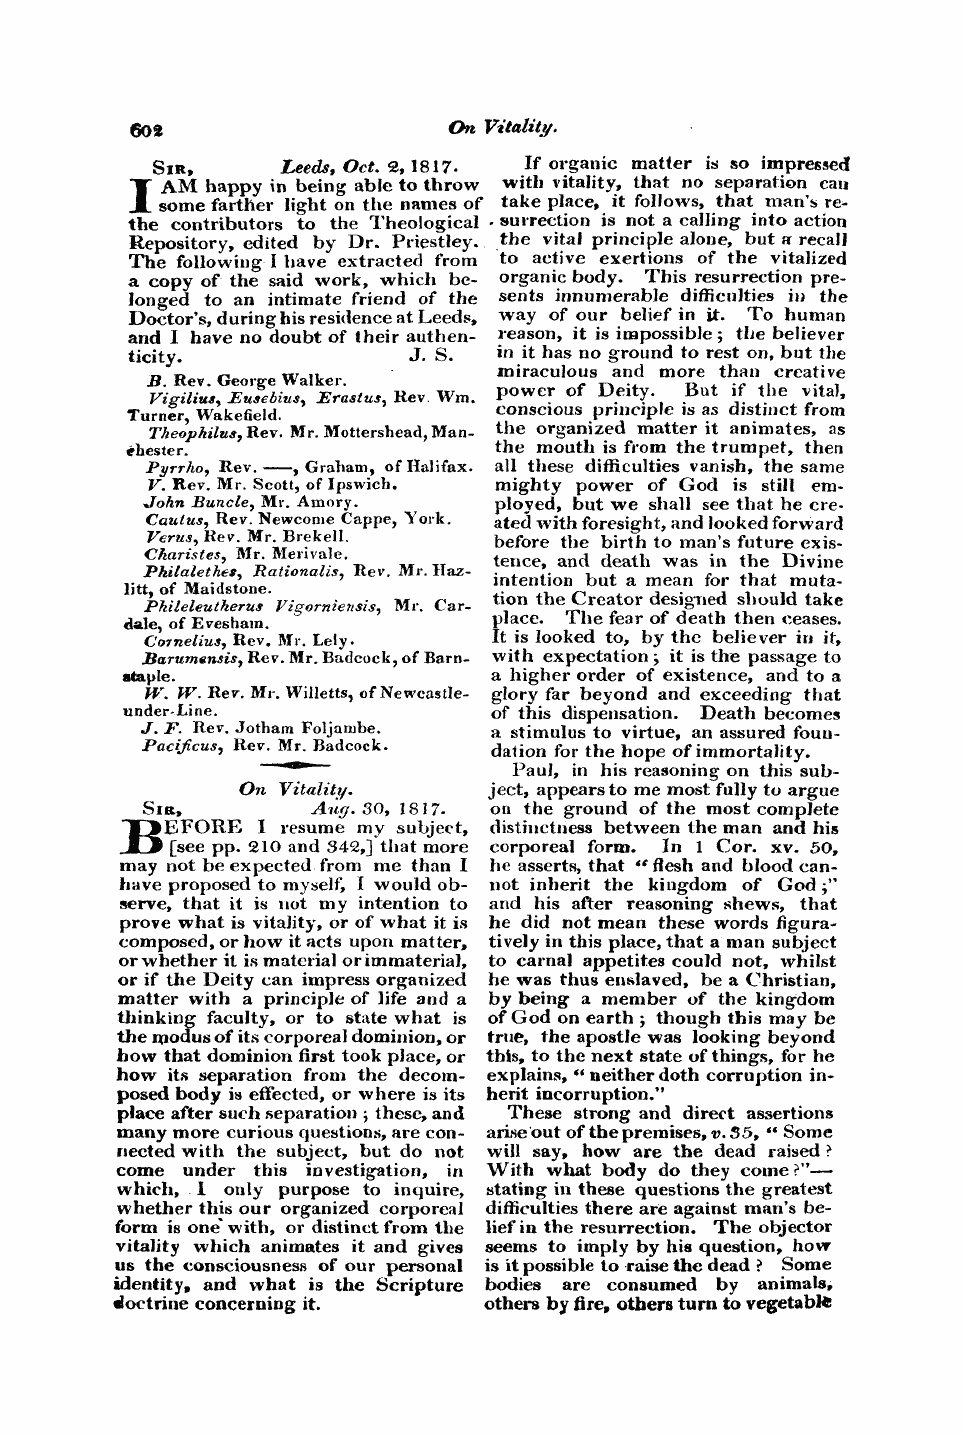 Monthly Repository (1806-1838) and Unitarian Chronicle (1832-1833): F Y, 1st edition: 30